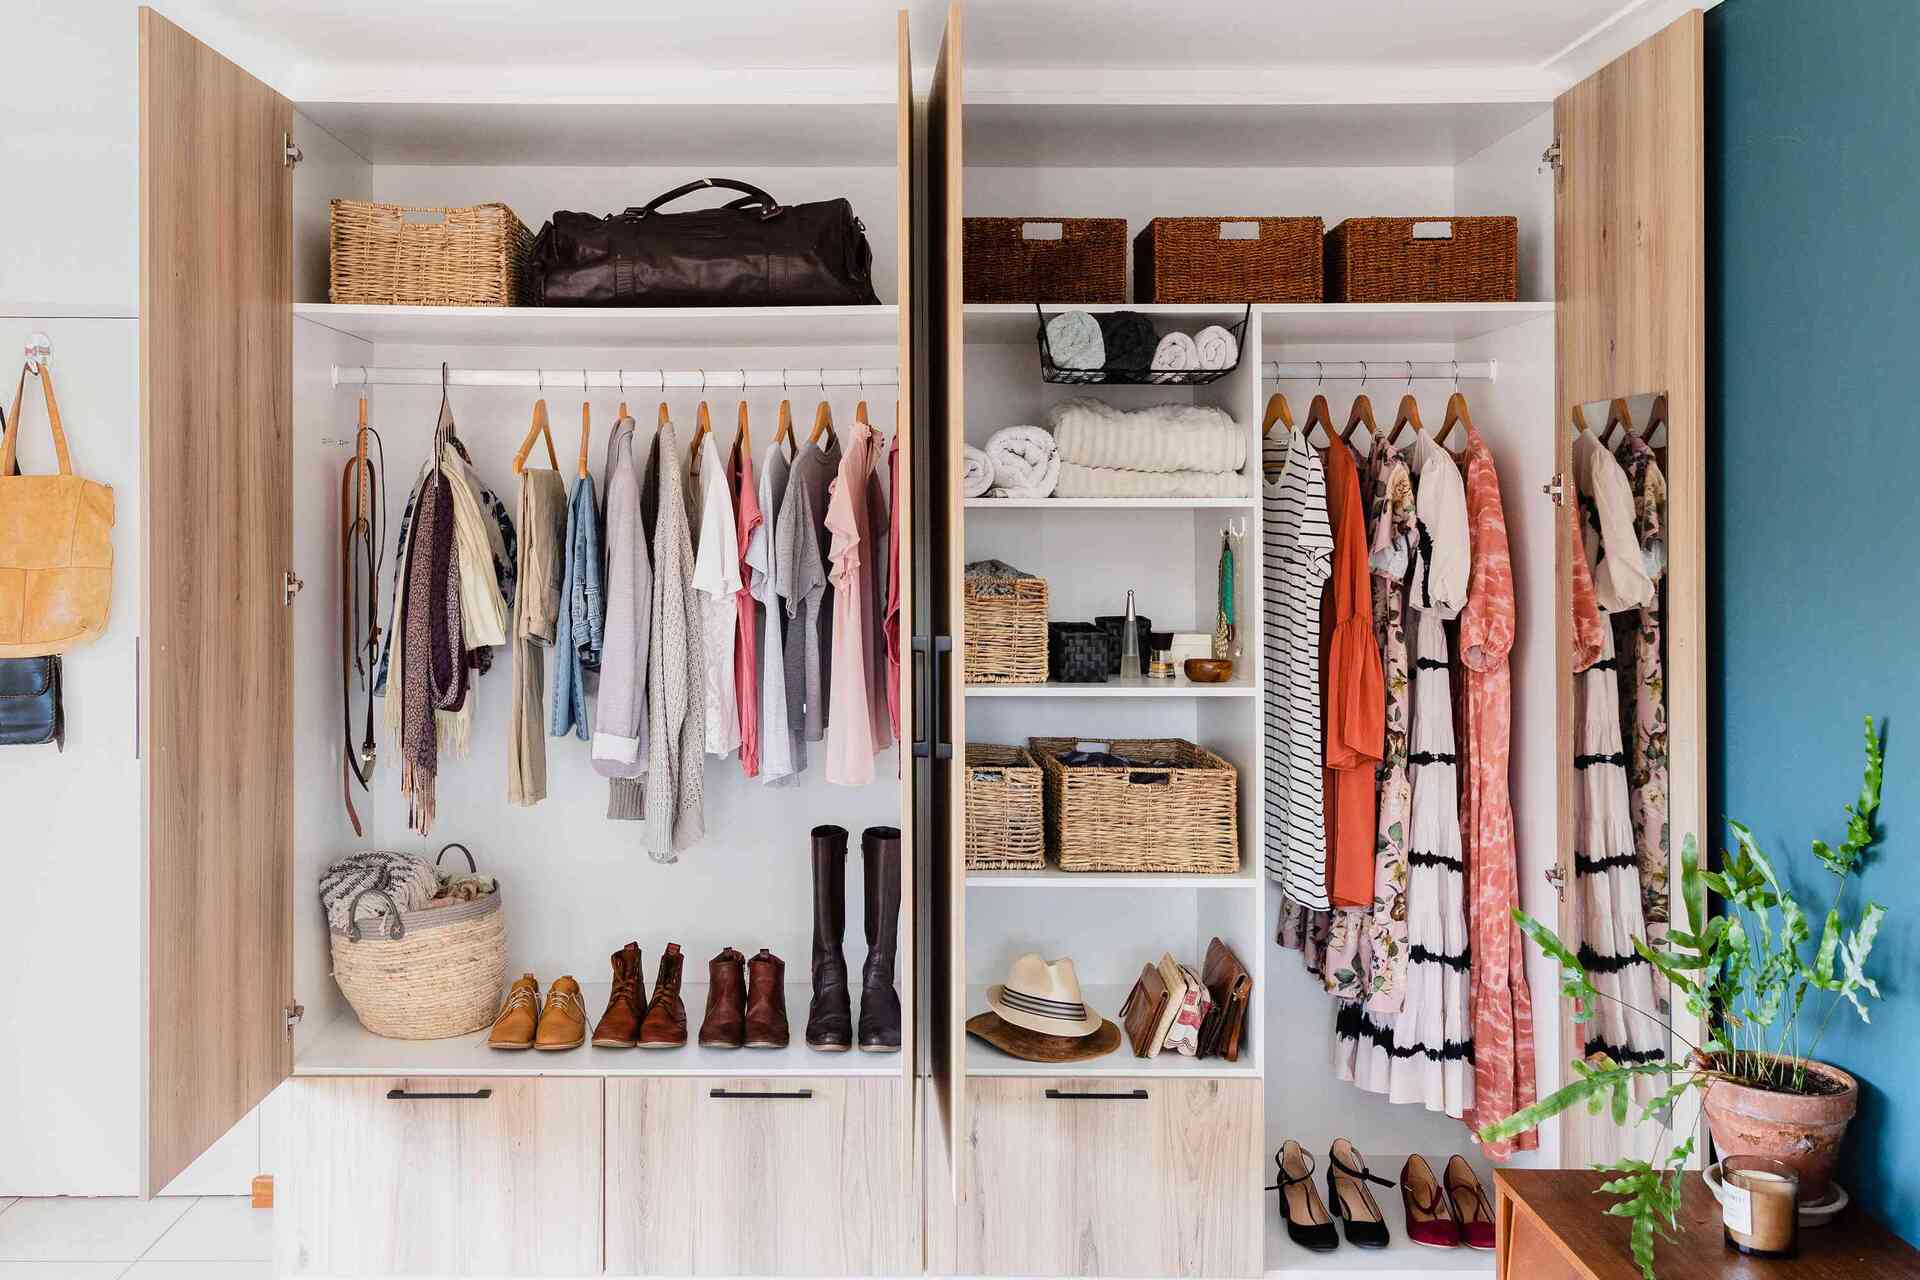 How To Organize A Closet Without Buying Anything: 6 Tricks